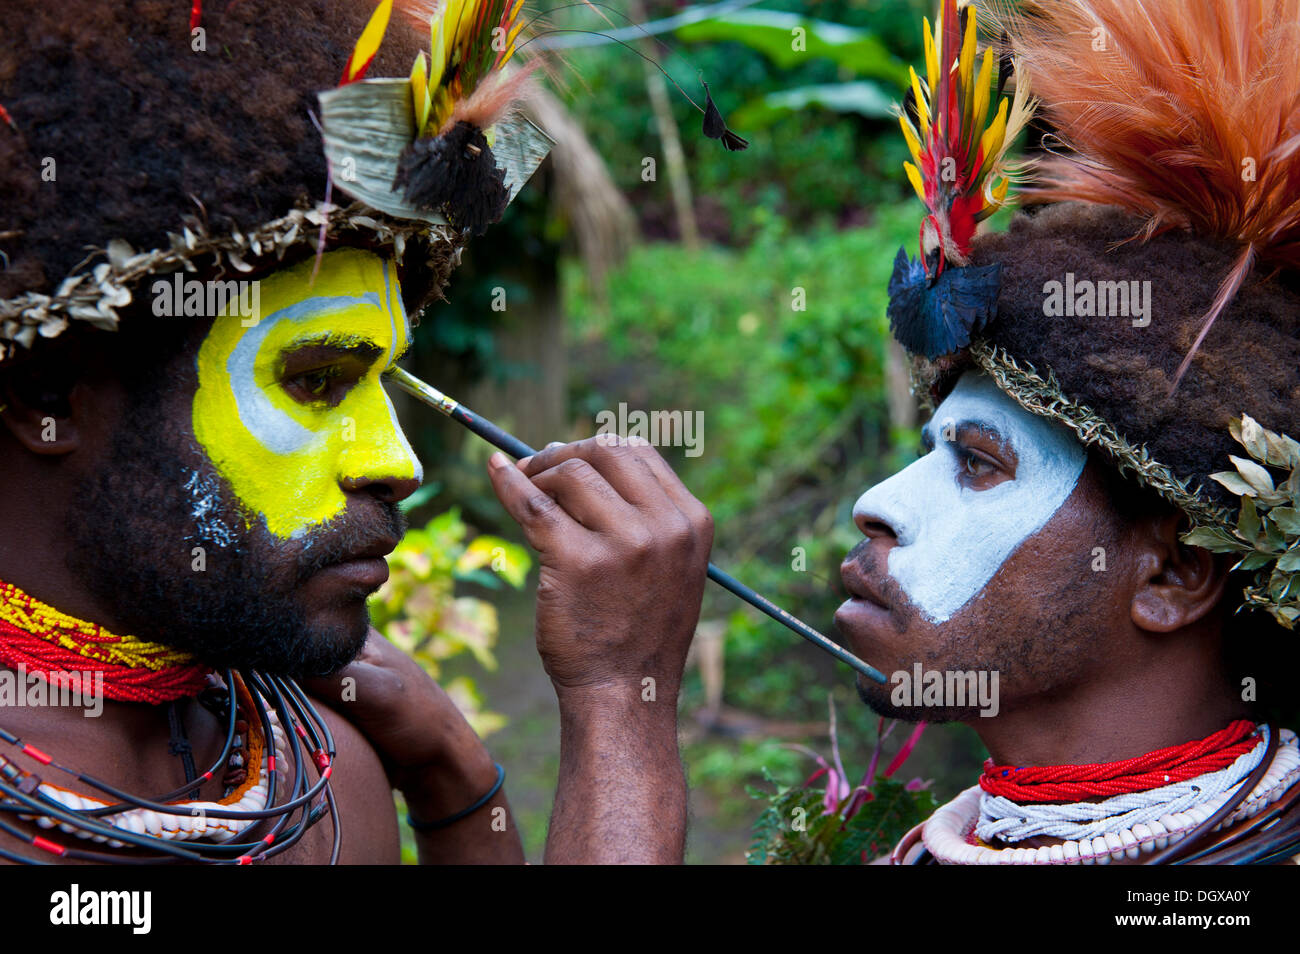 Man is made up for the traditional Sing Sing gathering in the highlands, Paya, Papua New Guinea Stock Photo